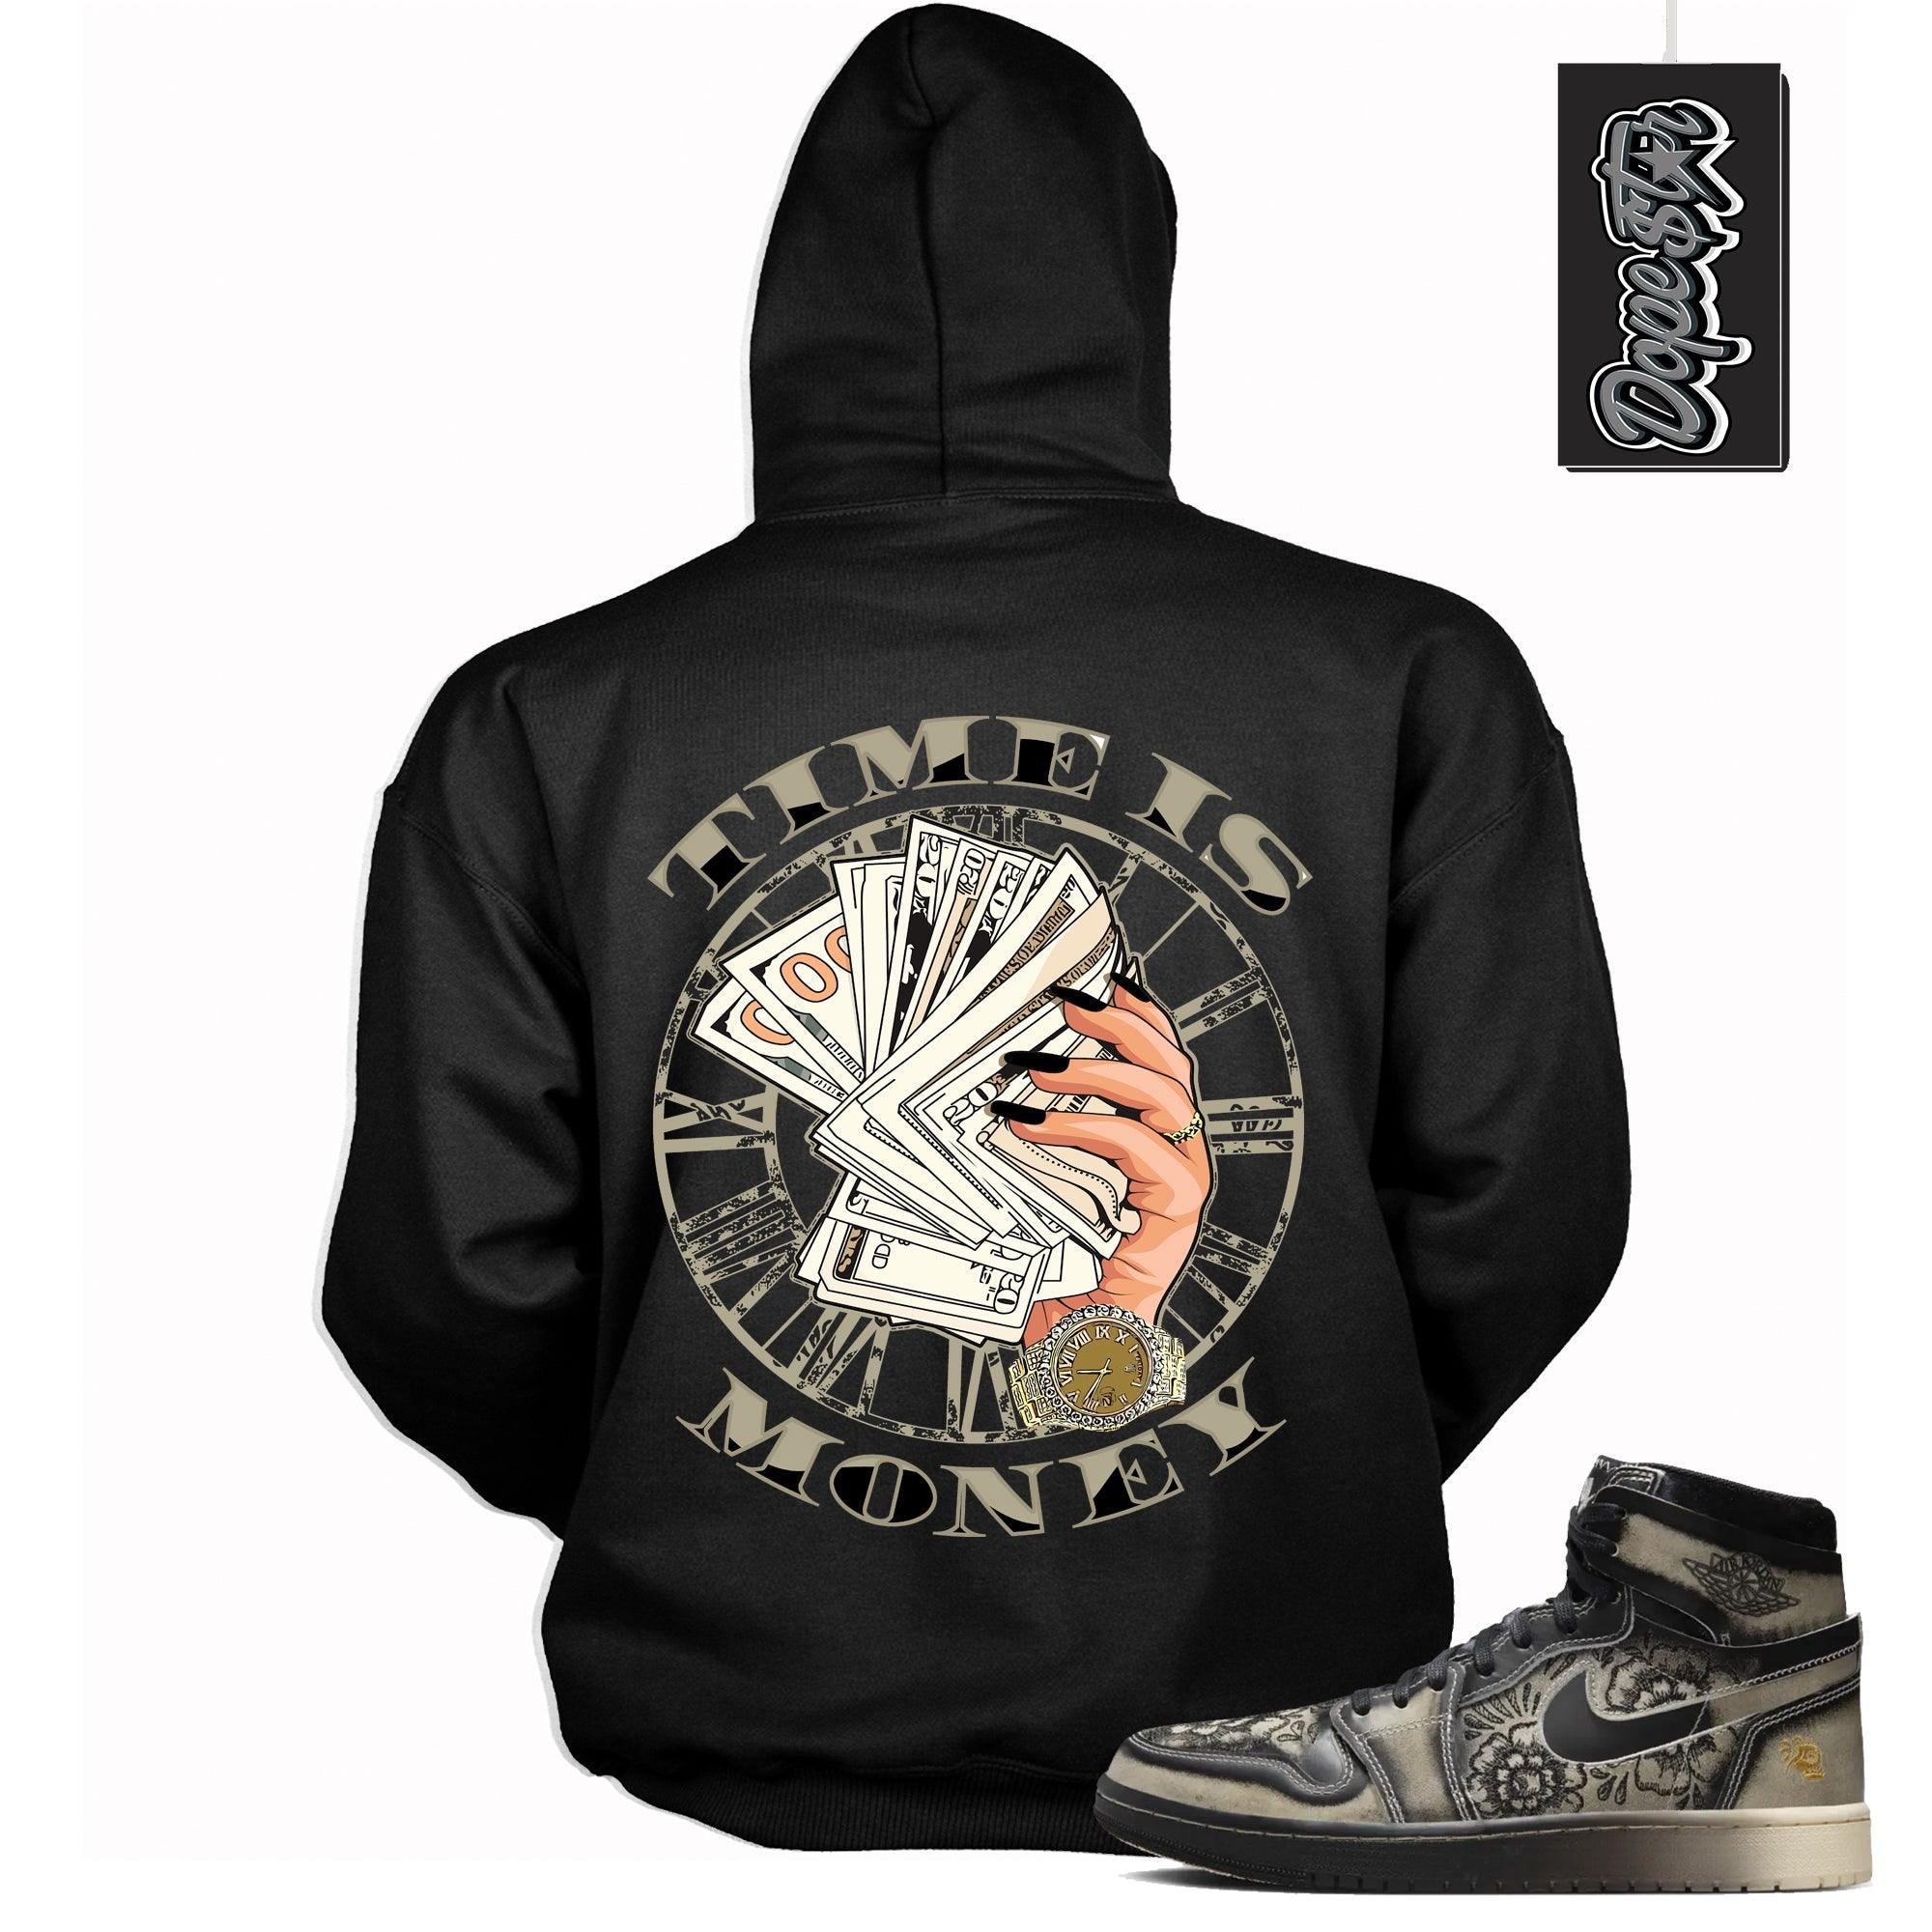 Cool Black Graphic Hoodie with “ TIME IS MONEY “ print, that perfectly matches Air Jordan 1 High Zoom Comfort 2 Dia de Muertos Black and Pale Ivory sneakers